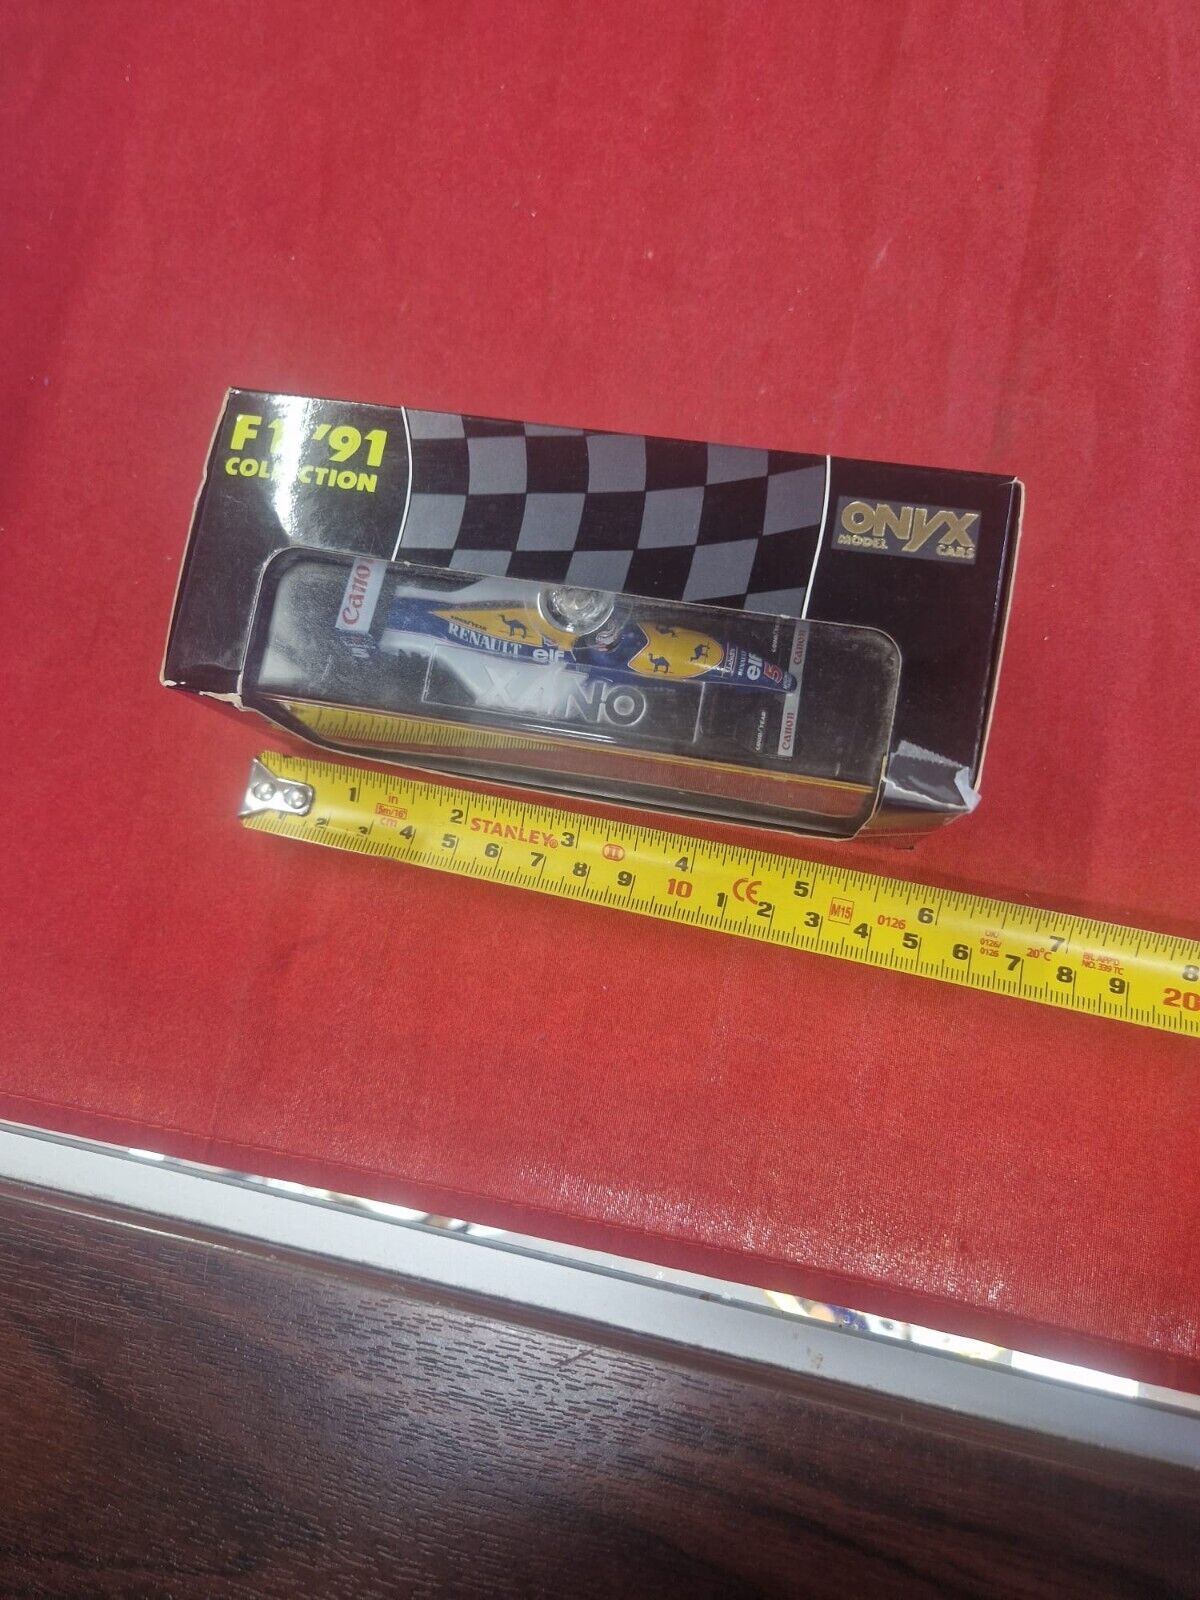 RARE Onyx Model Cars 119 Williams Renault F1 Nigel Mansell F1 '91  Collection Car